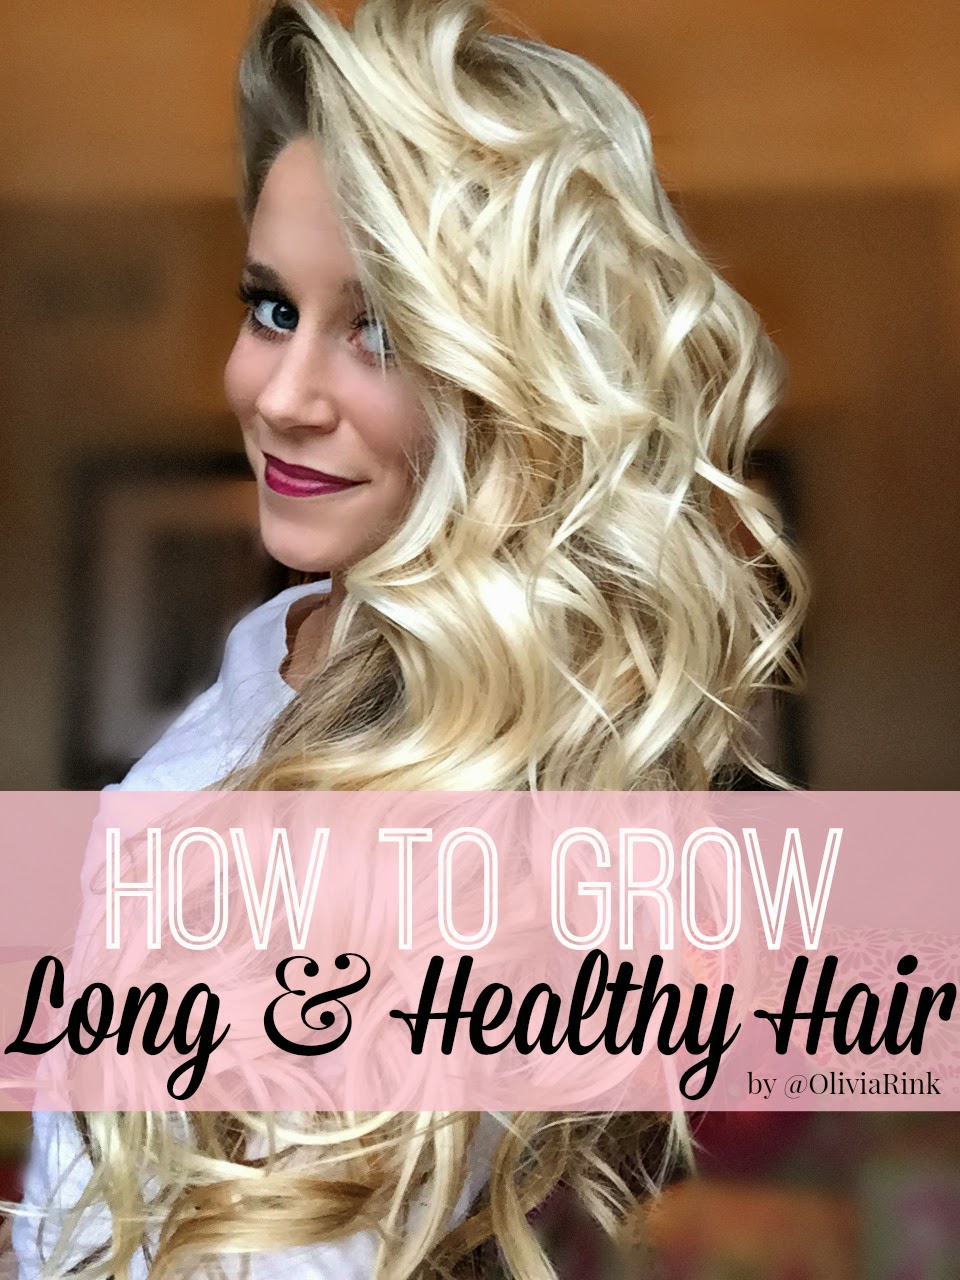 How to Grow Long & Healthy Hair - Welcome to Olivia Rink